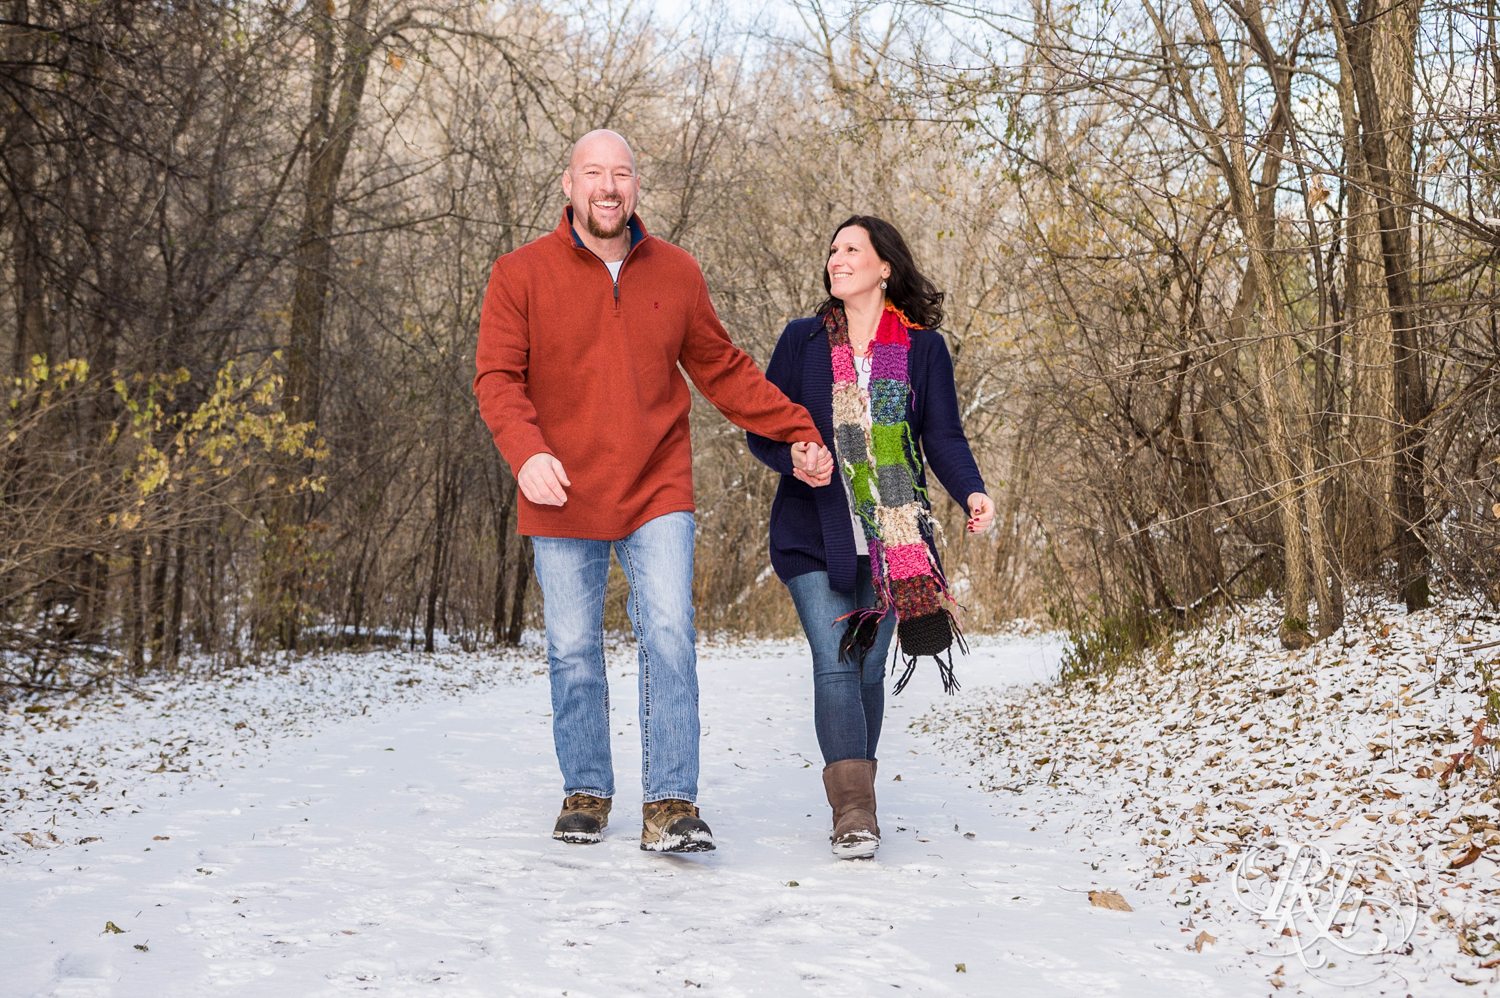 Man and woman laugh while walking in snow in Hidden Valley Park in Savage, Minnesota.